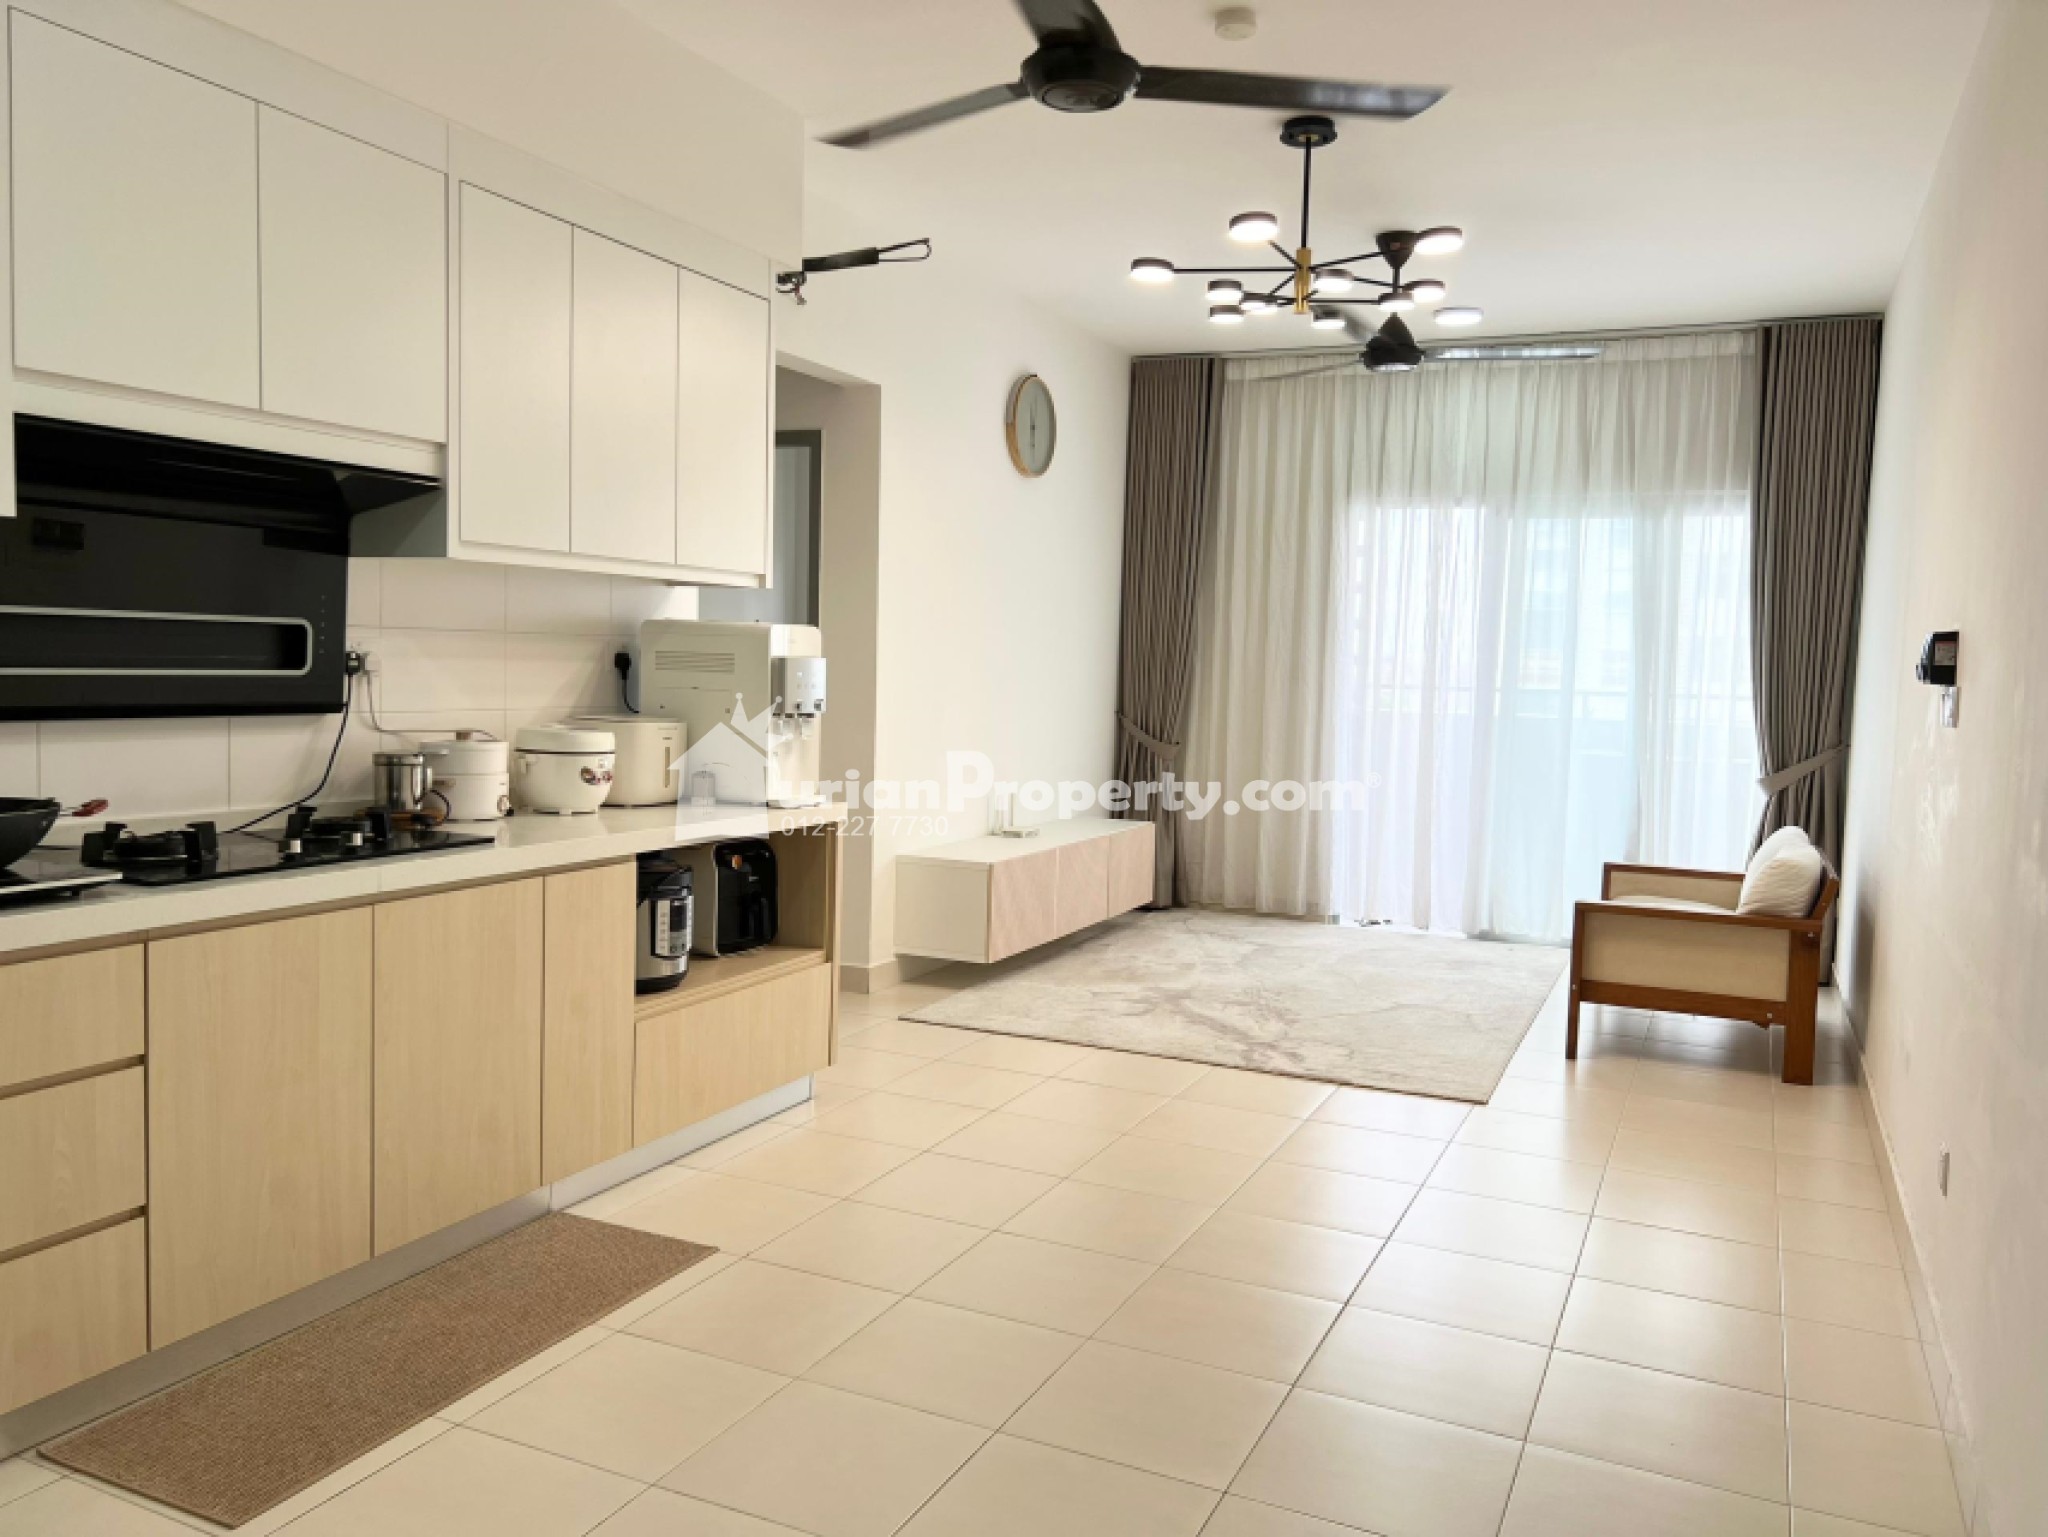 Apartment For Sale at Tropicana Aman